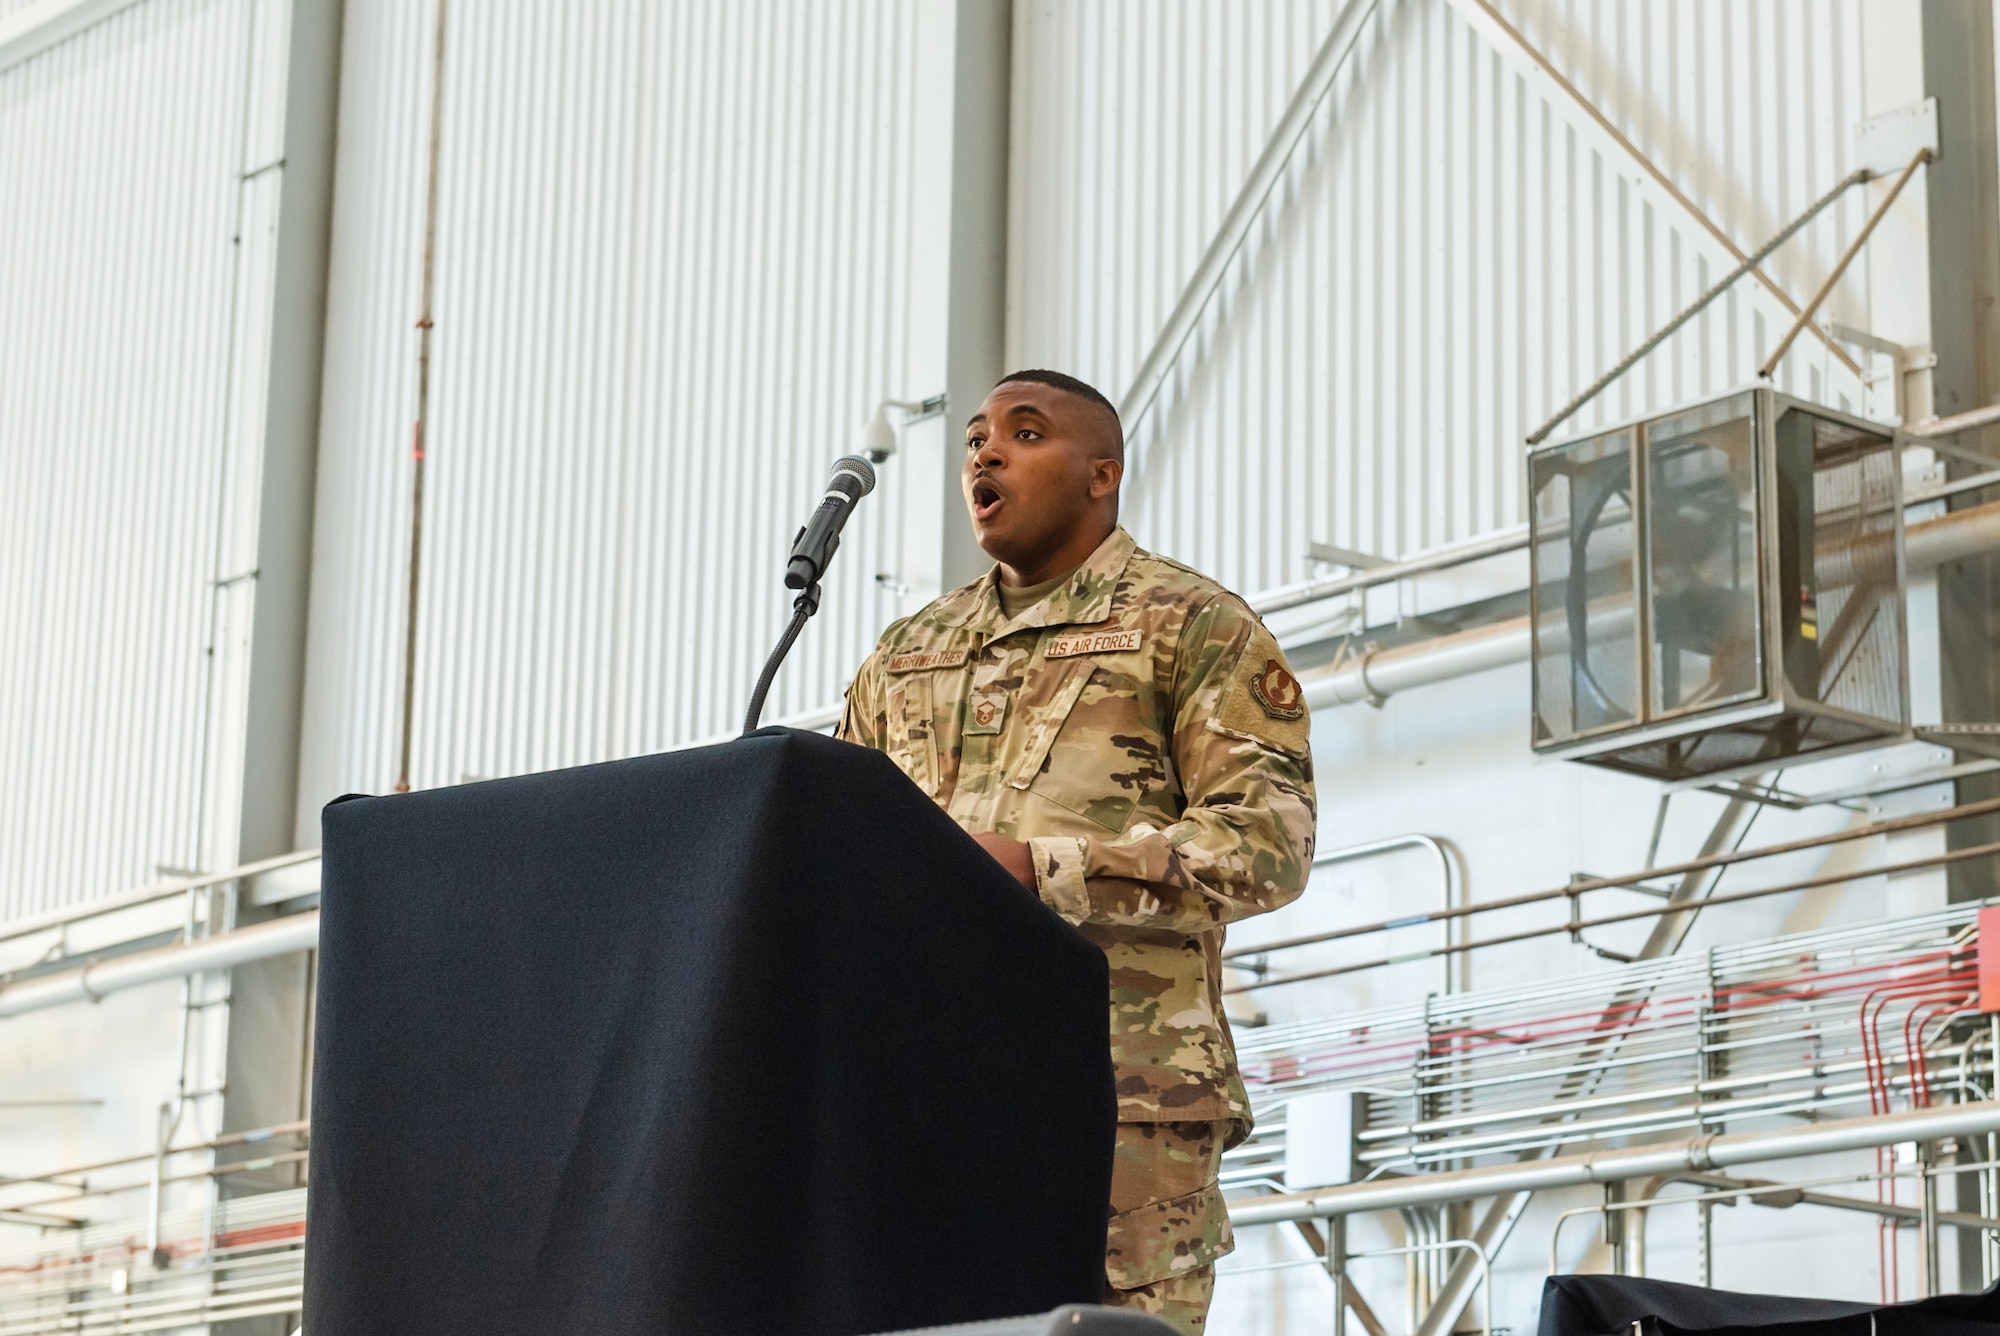 Master Sgt. Marshall Merriweather, 412th Logistics Readiness Squadron, sings the National Anthem during the 75th Anniversary of Supersonic Flight Ceremony Oct. 14.